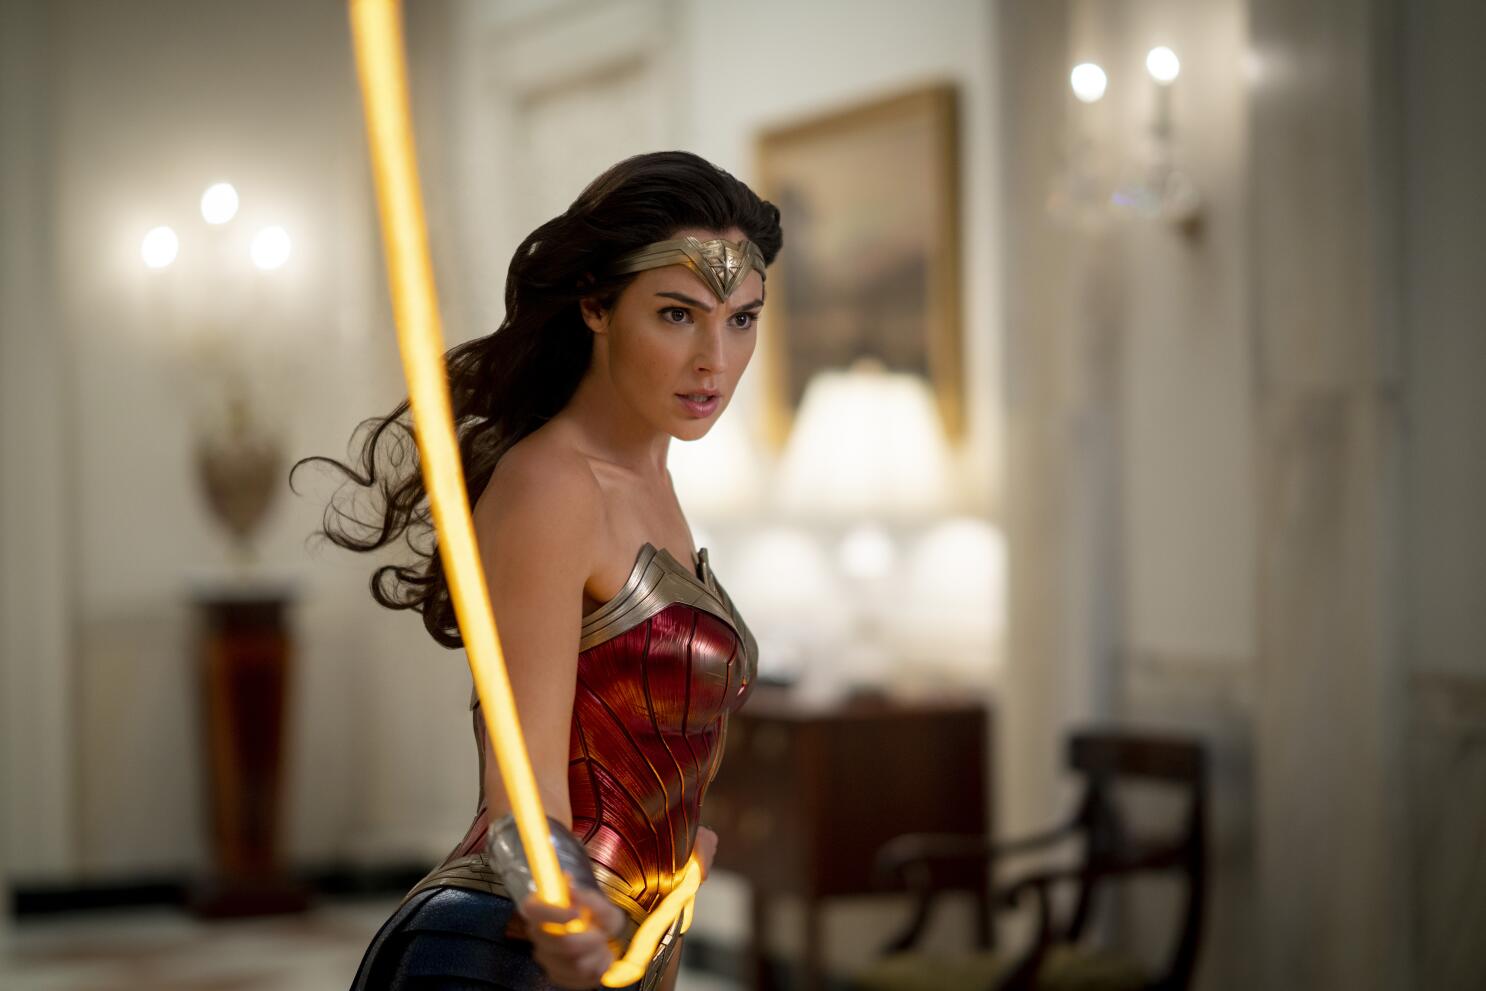 Wonder Woman 1984 movie review - crimes against men and children -   - Filmmaking Gear and Camera Reviews